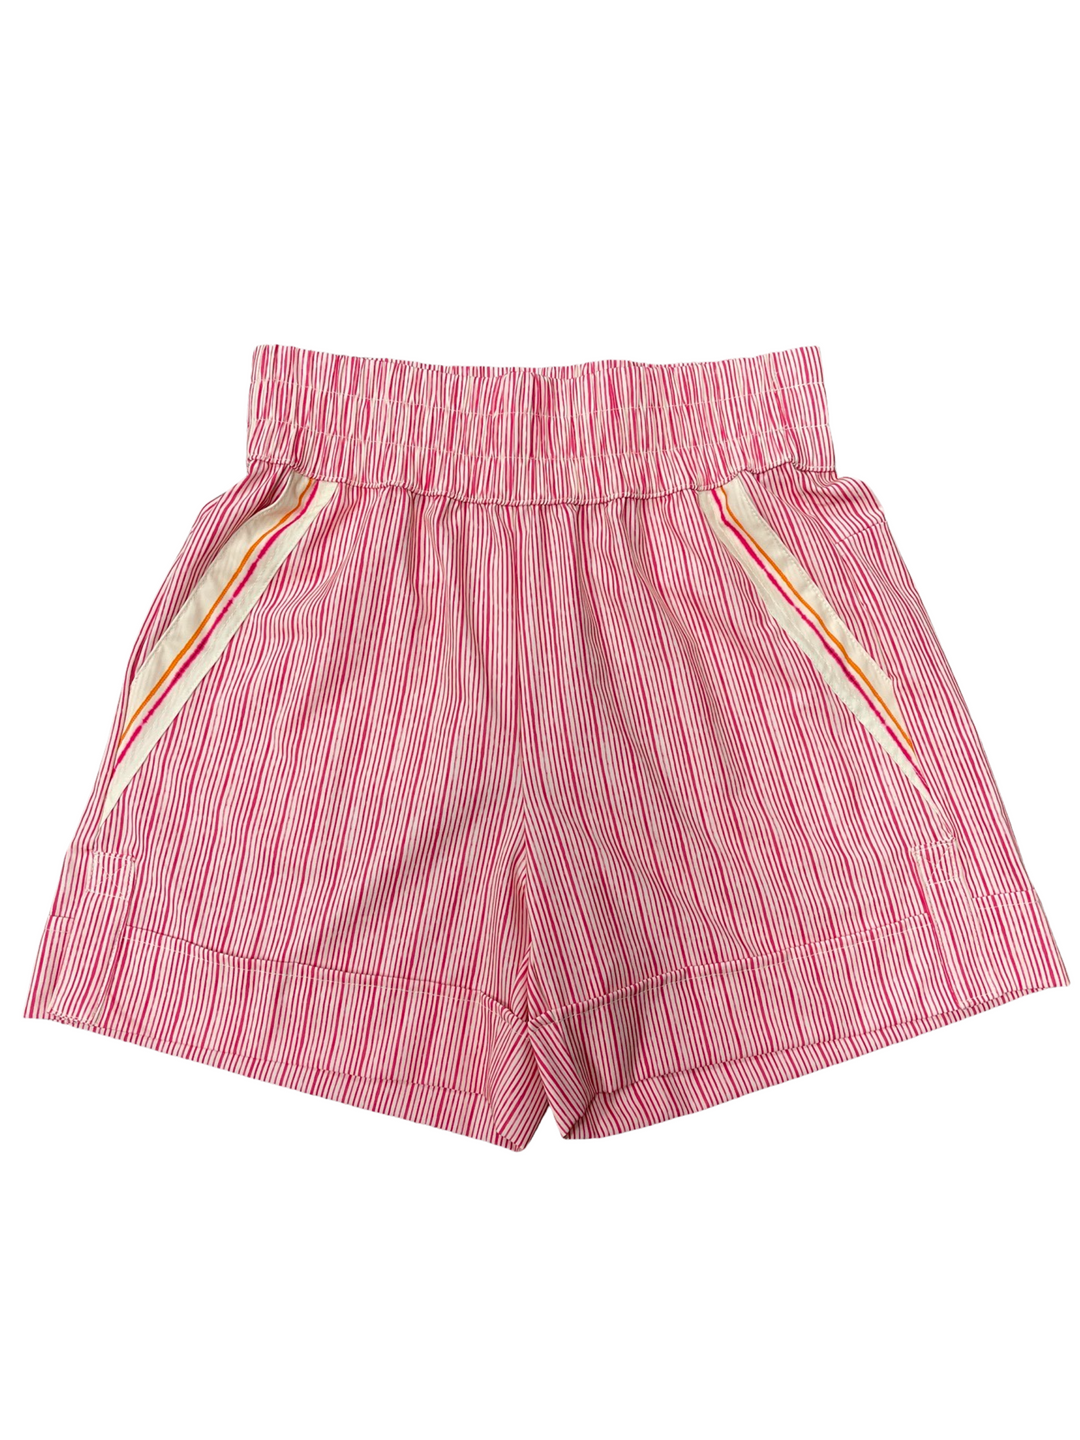 Lucky in Love Pink Classic Stripe Short - Small - Skorzie